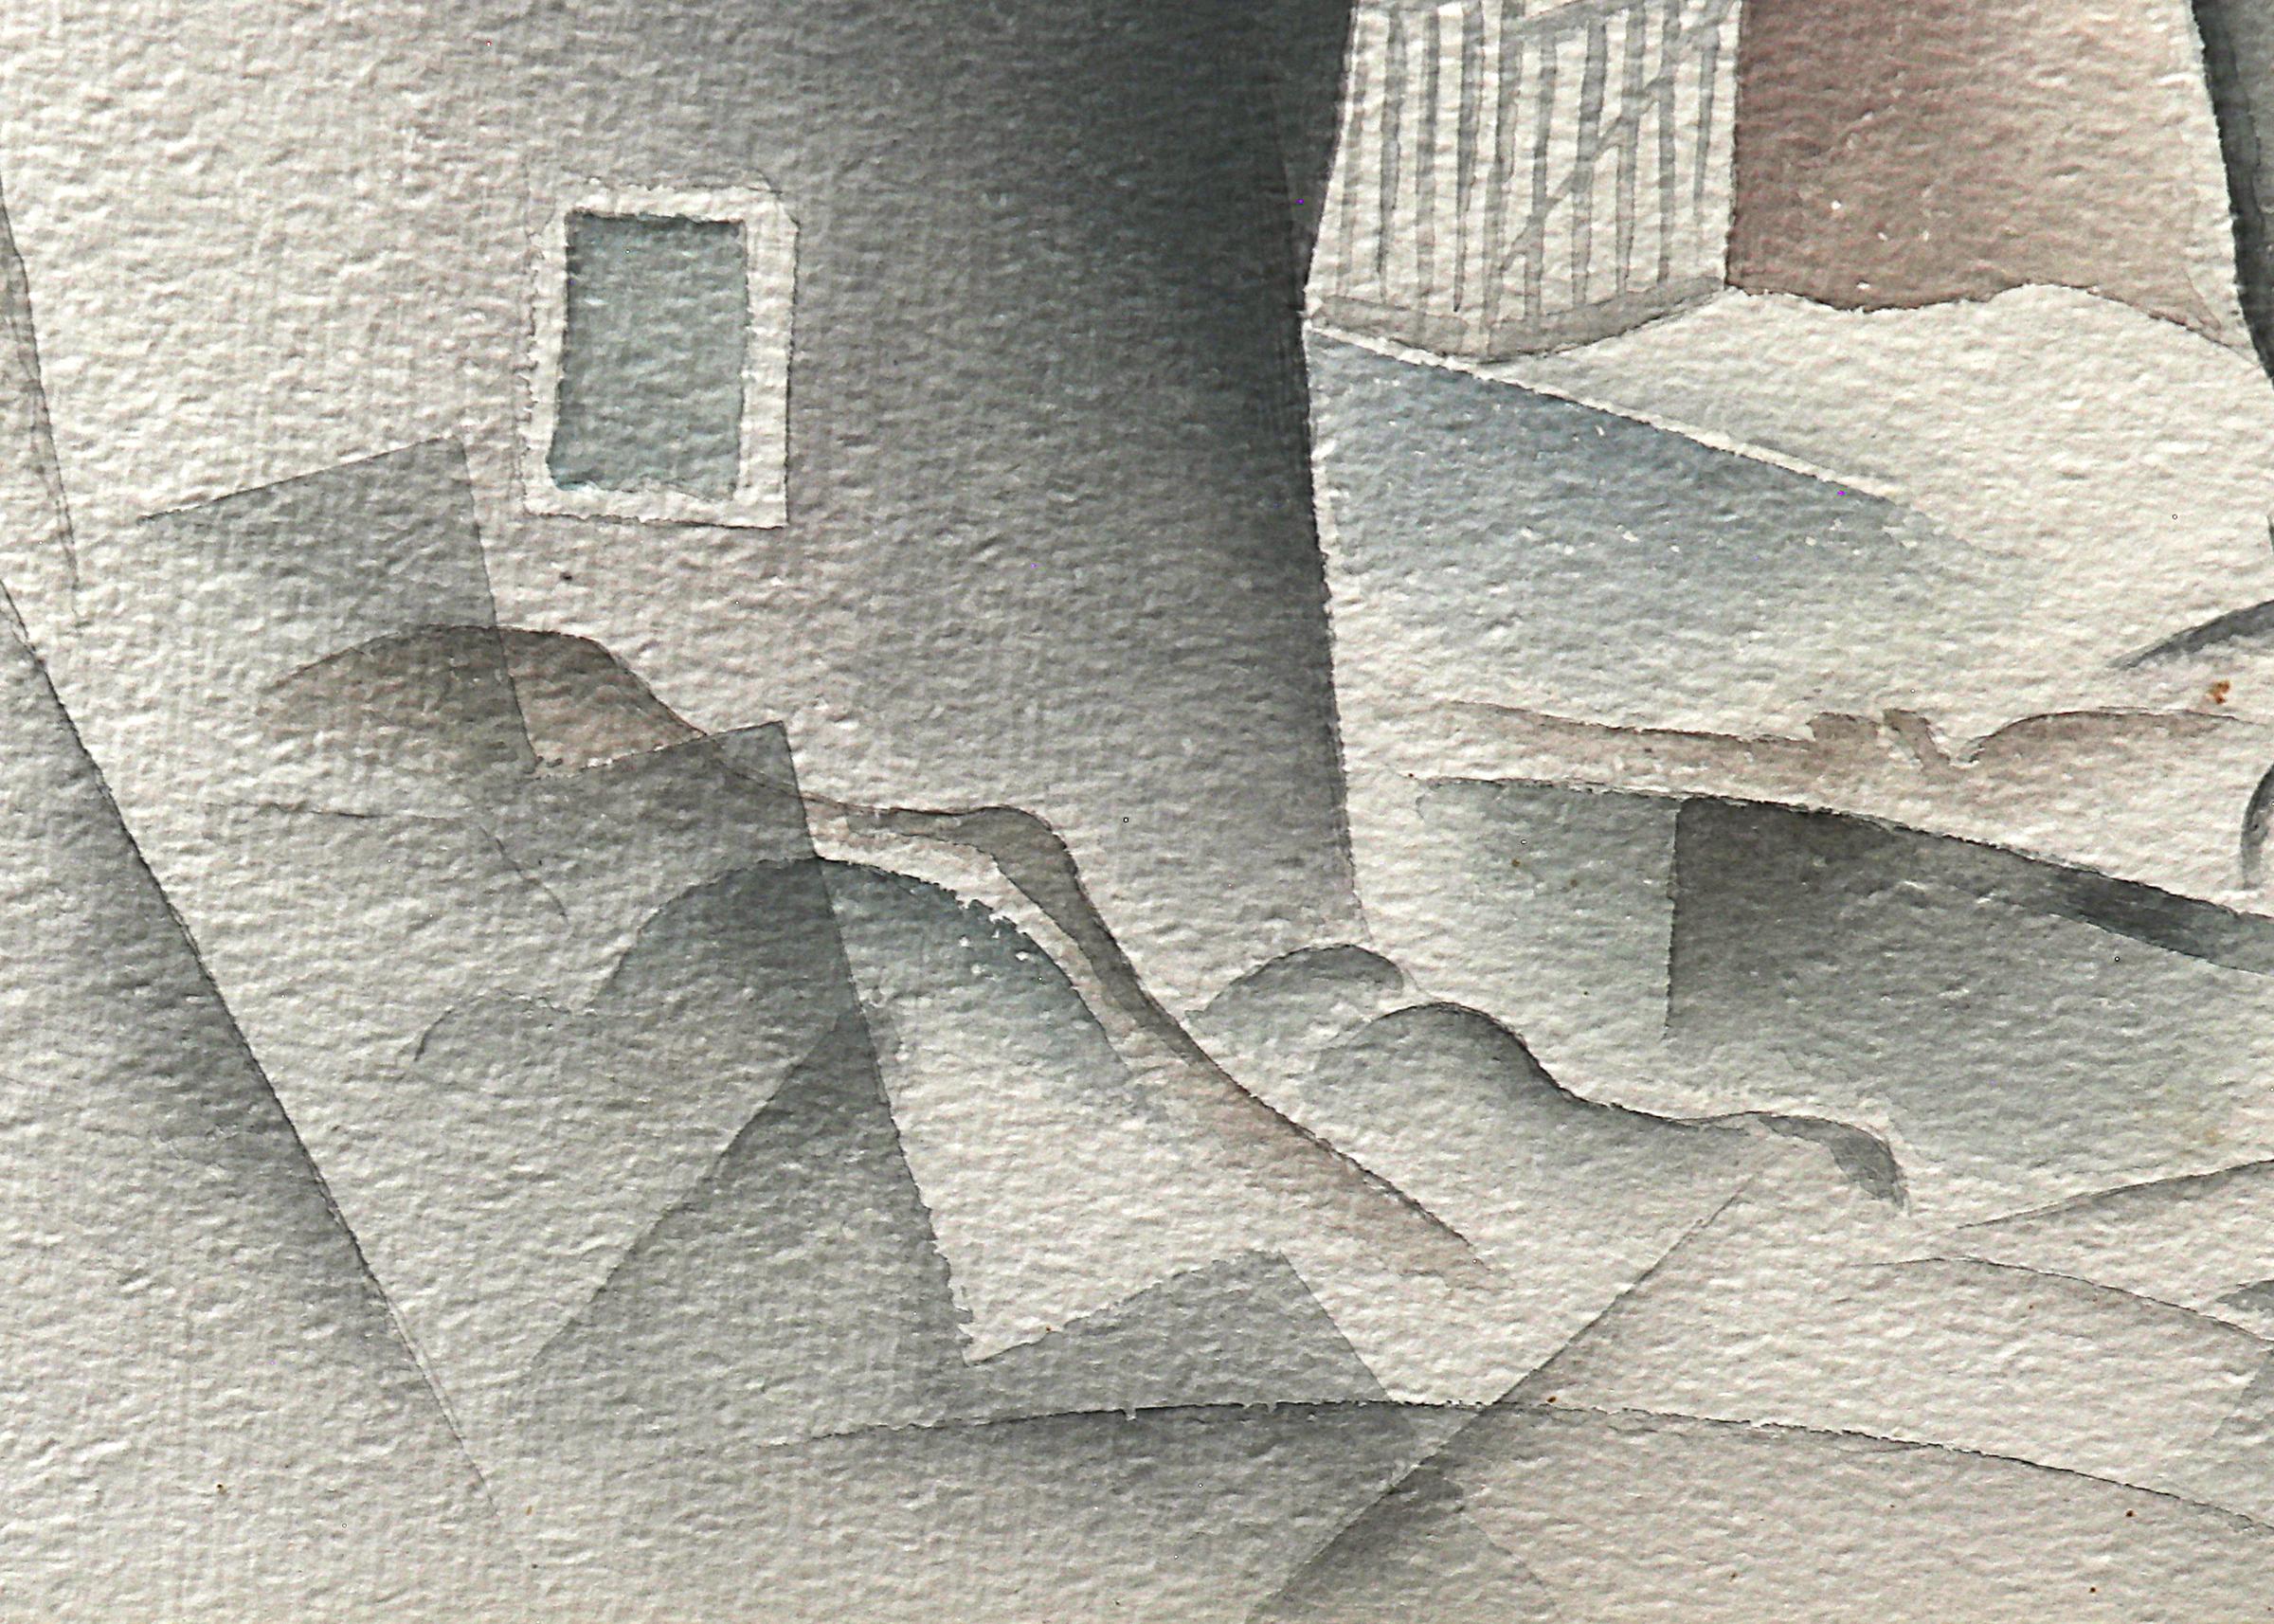 Colorado Modernist landscape, watercolor on paper by Turner B. Messick (1878-1952) from 1938. Tree with houses and mountains in the background, painted in shades of white, gray, purple, and blue. Image is 16¾  x 14 inches, framed dimensions are 24 ¼